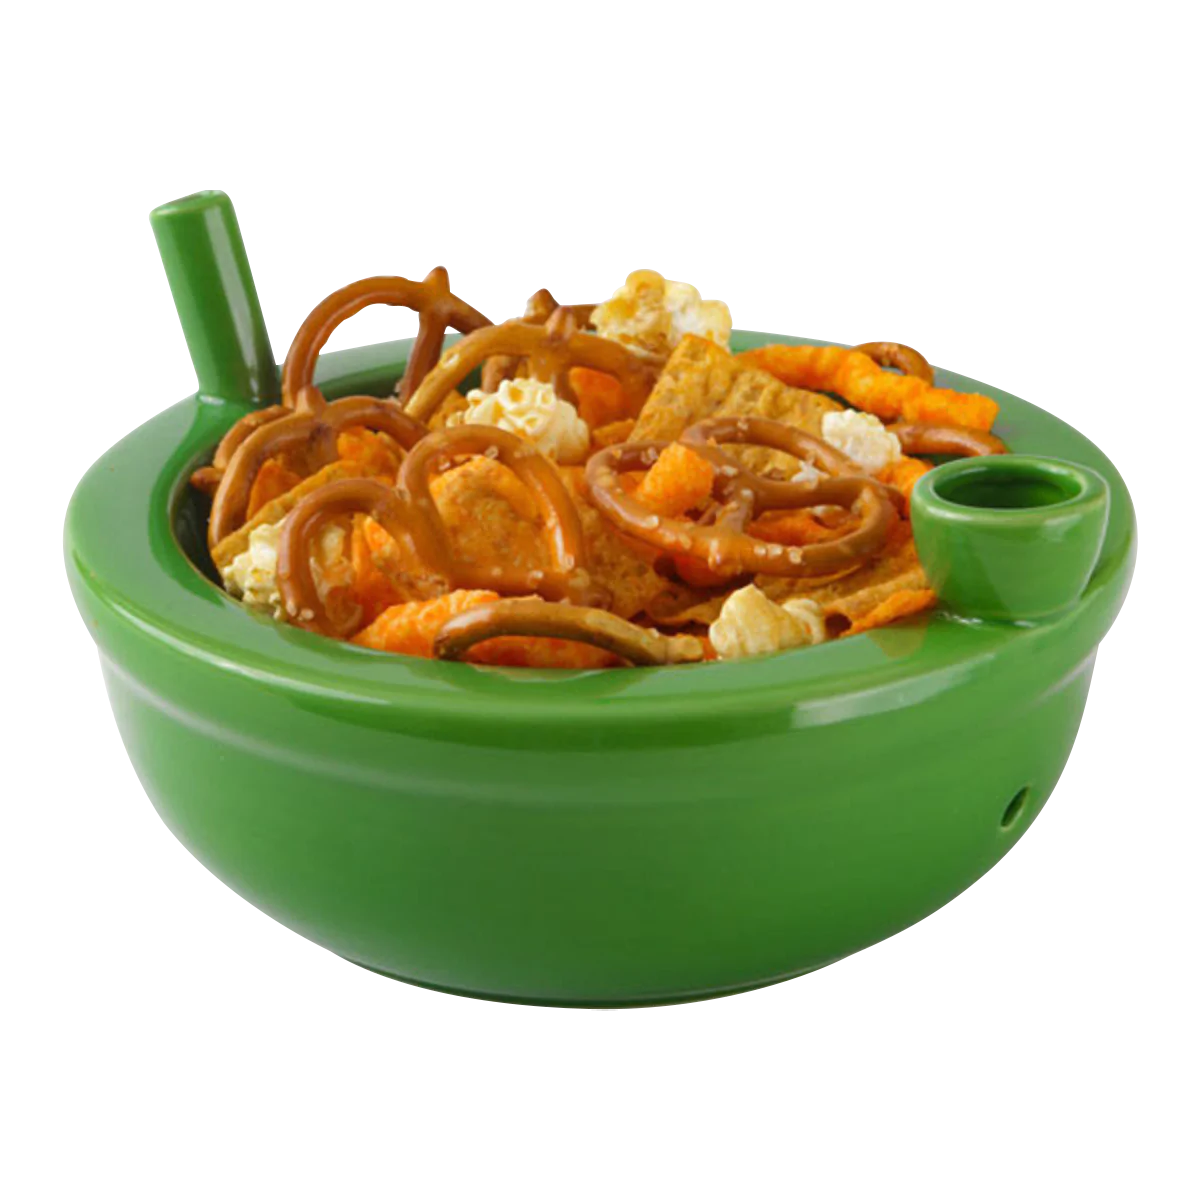 Roast & Toast Ceramic Cereal Bowl Pipe in Green with Snack Mix - Novelty Gift